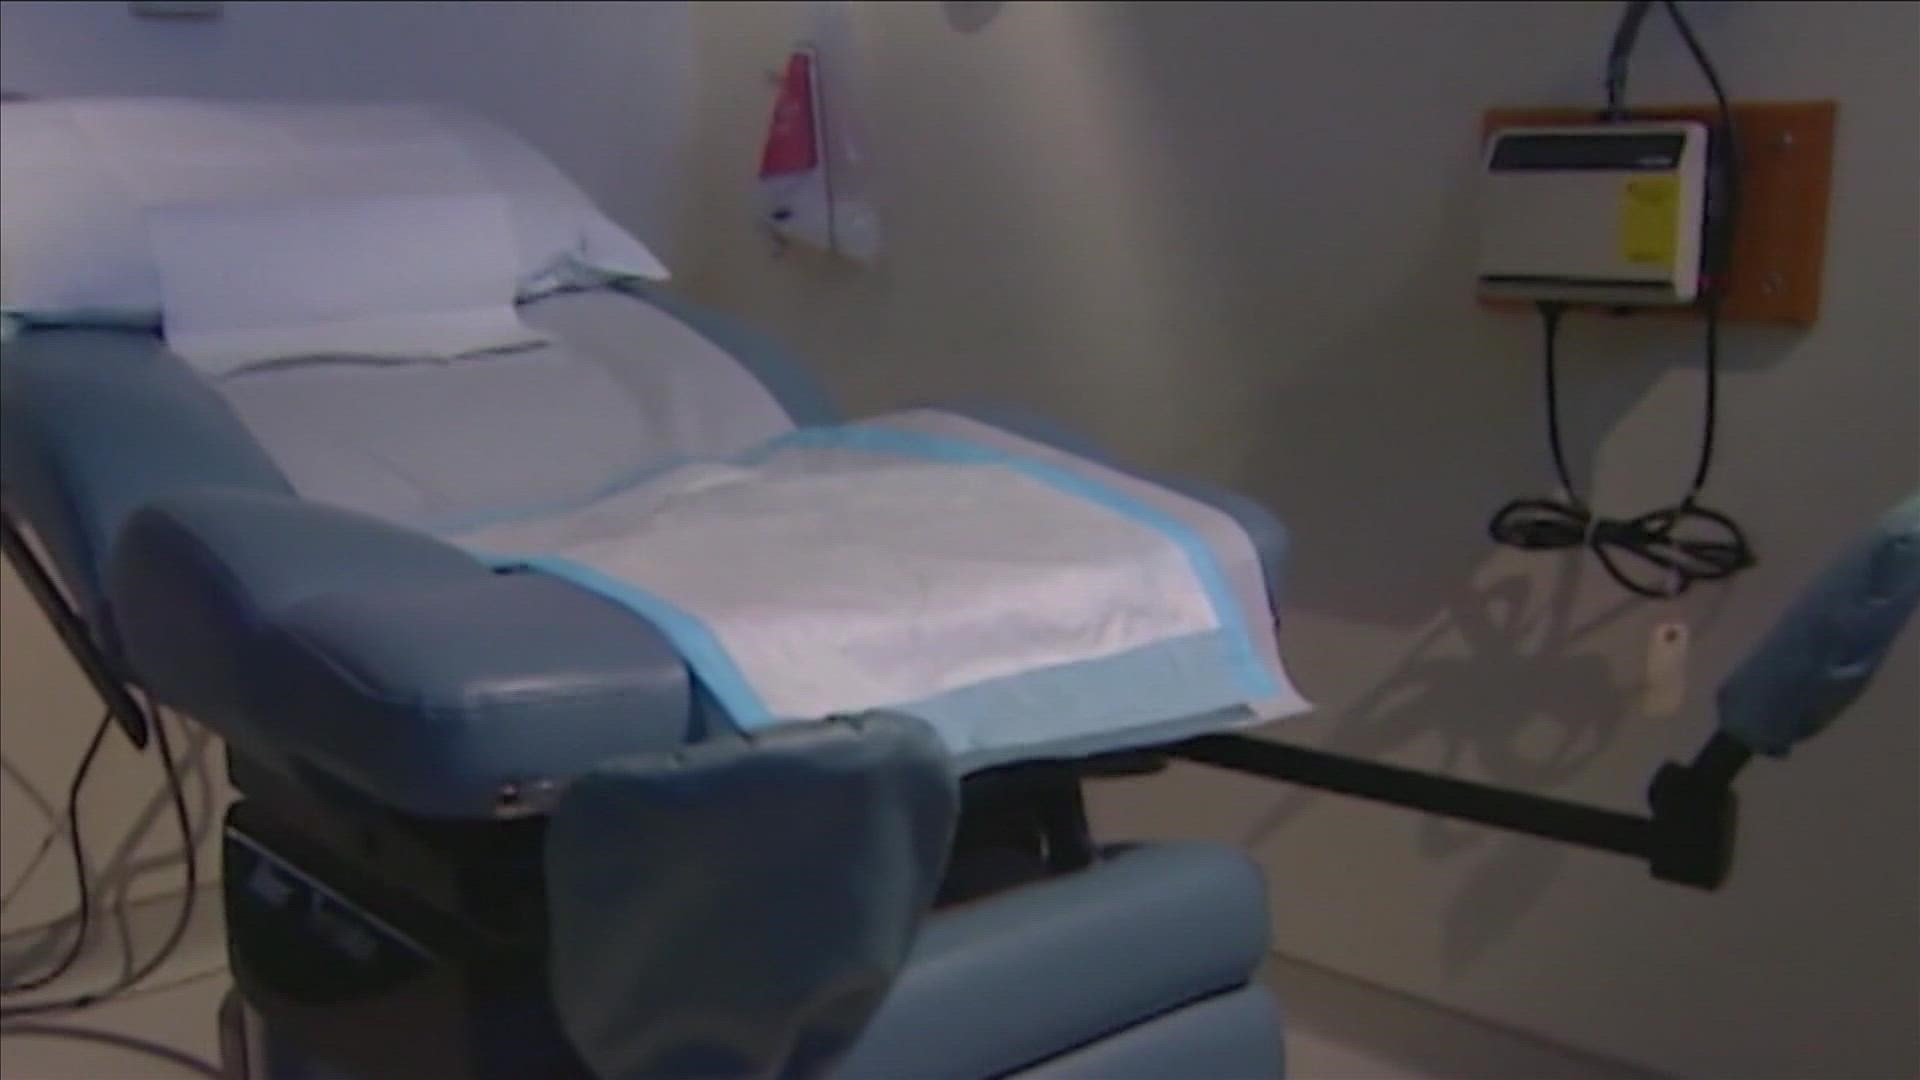 ABC24’s Brad Broders spoke with those who are working to help women who are considering an abortion now that the procedure could soon be banned for many.